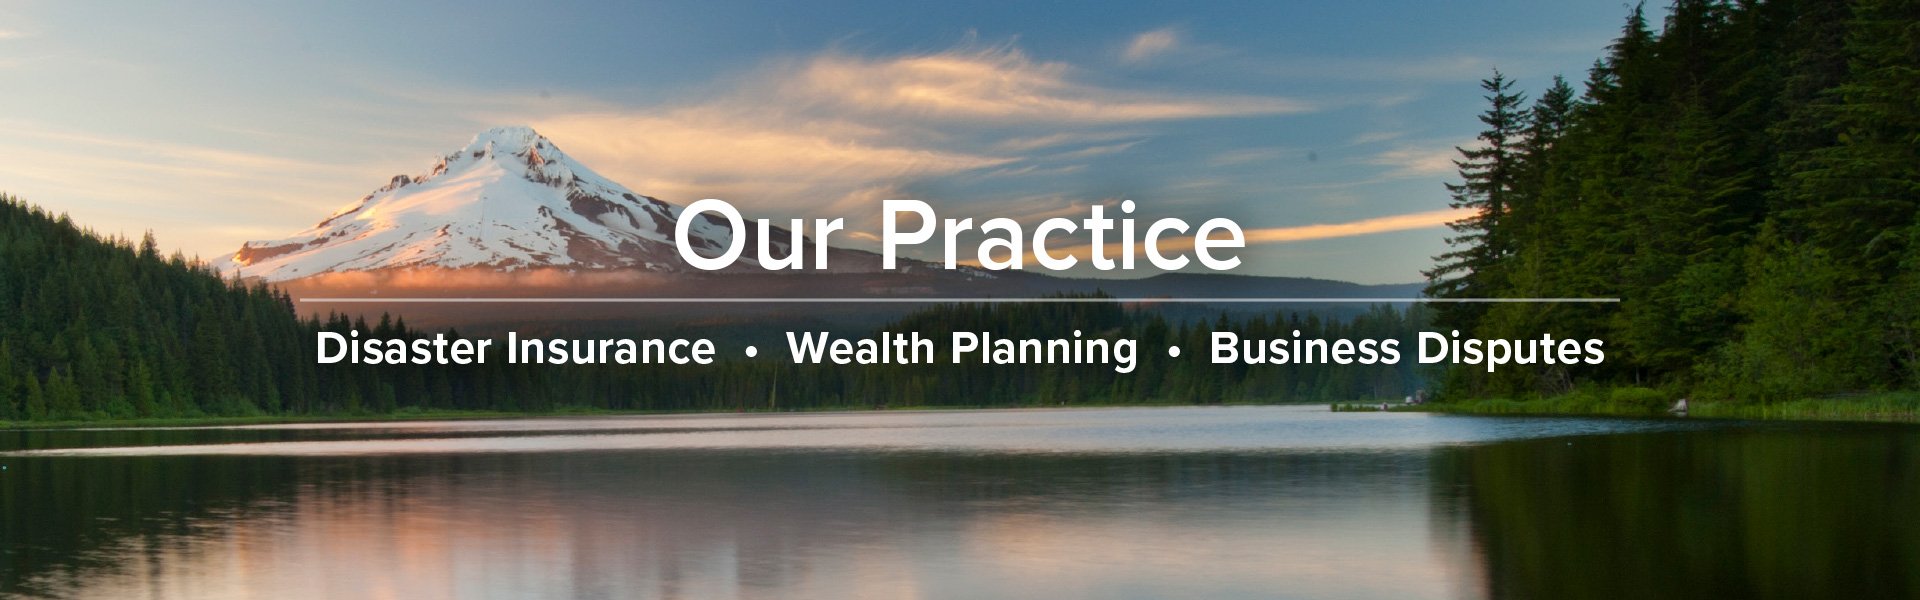 Our Practice: Disaster Insurance, Wealth Planning, Business Disputes